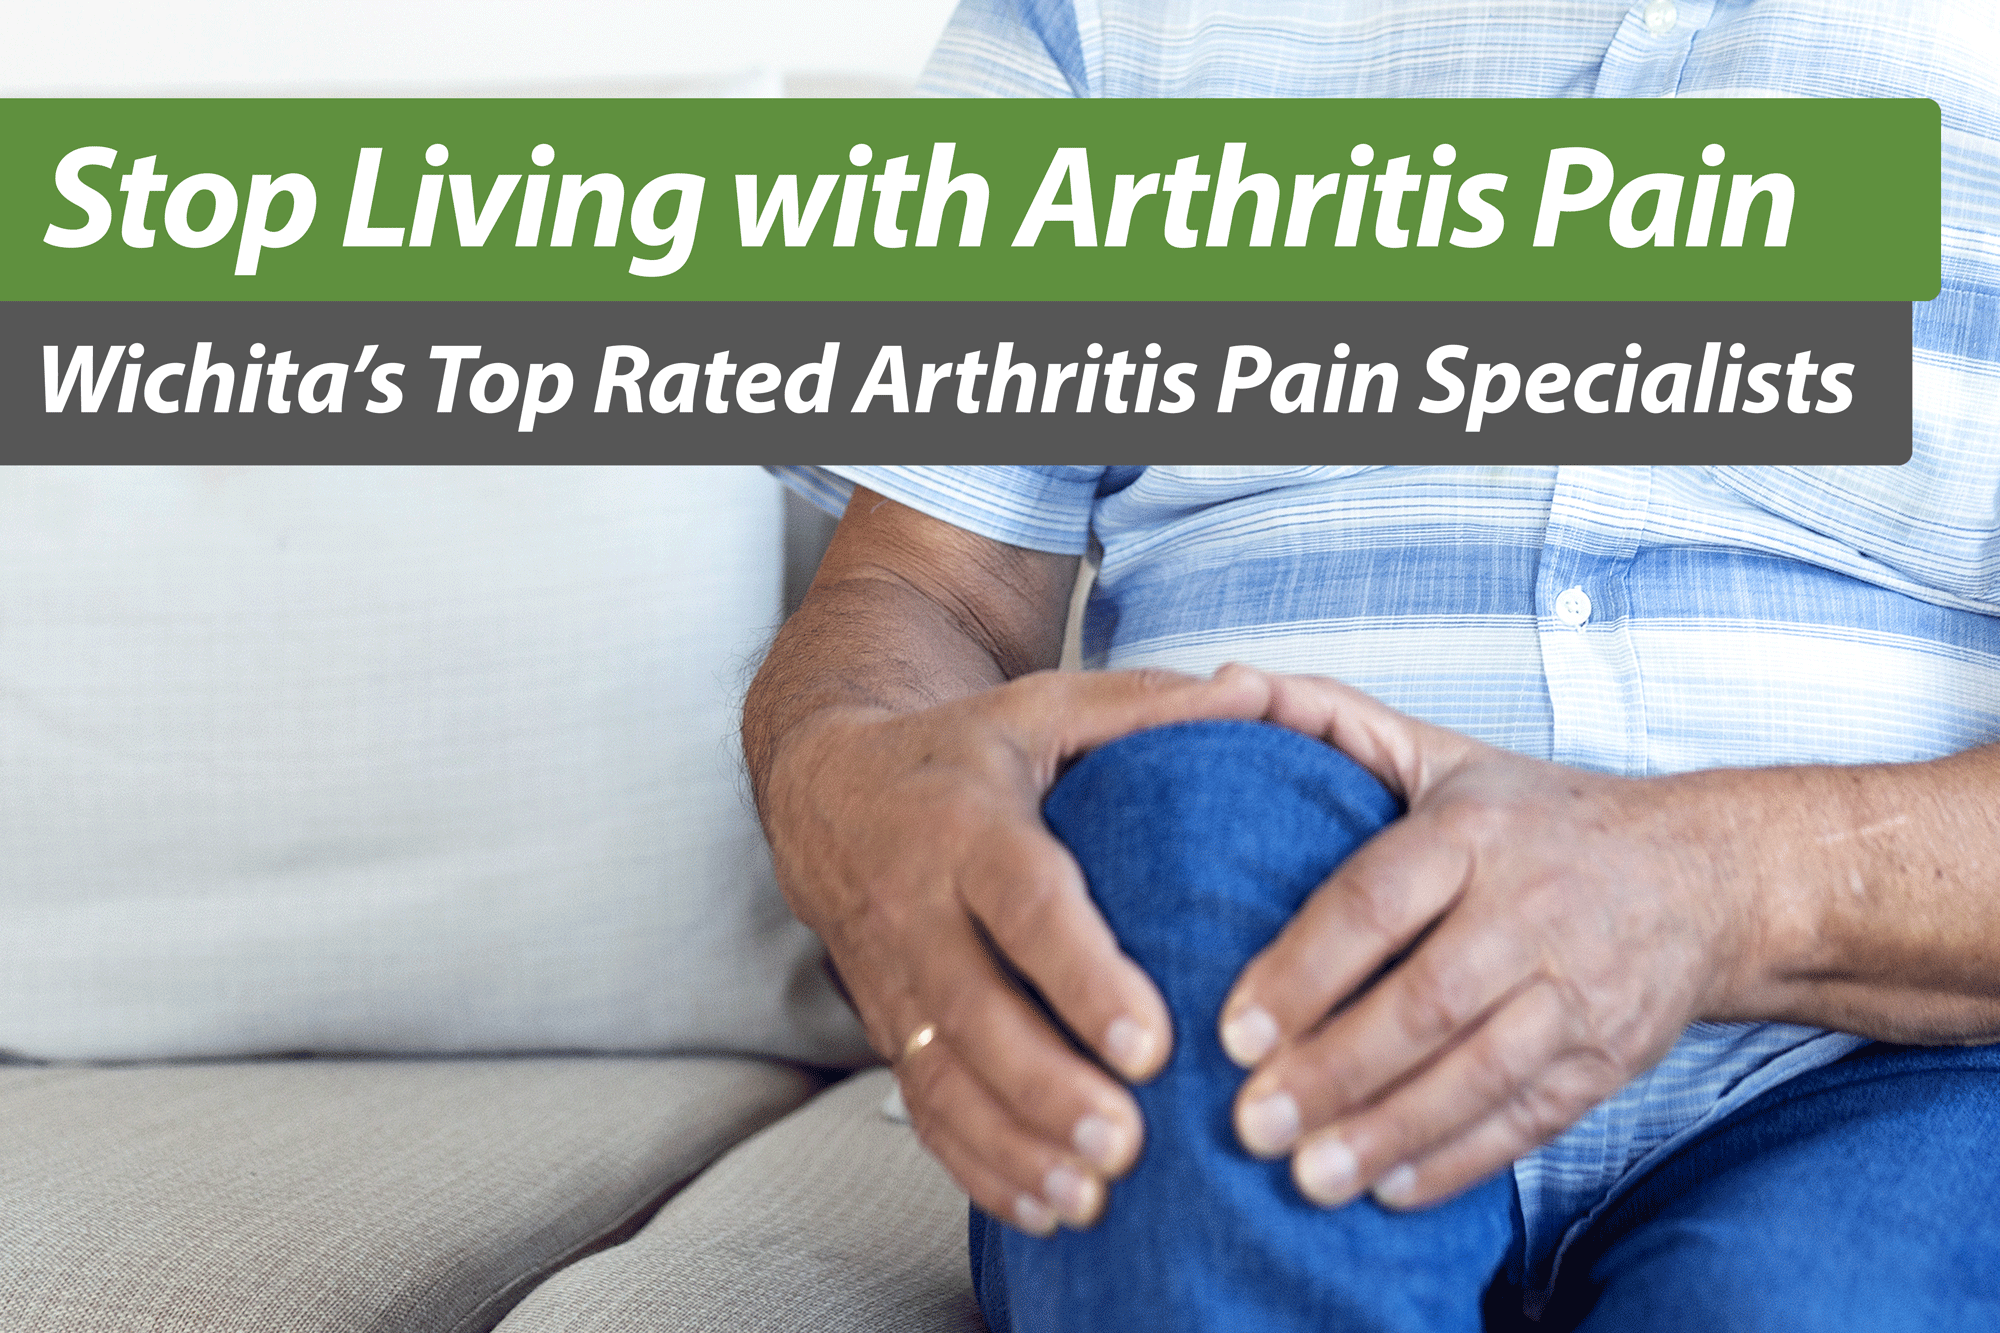 Stop Living with Arthritis